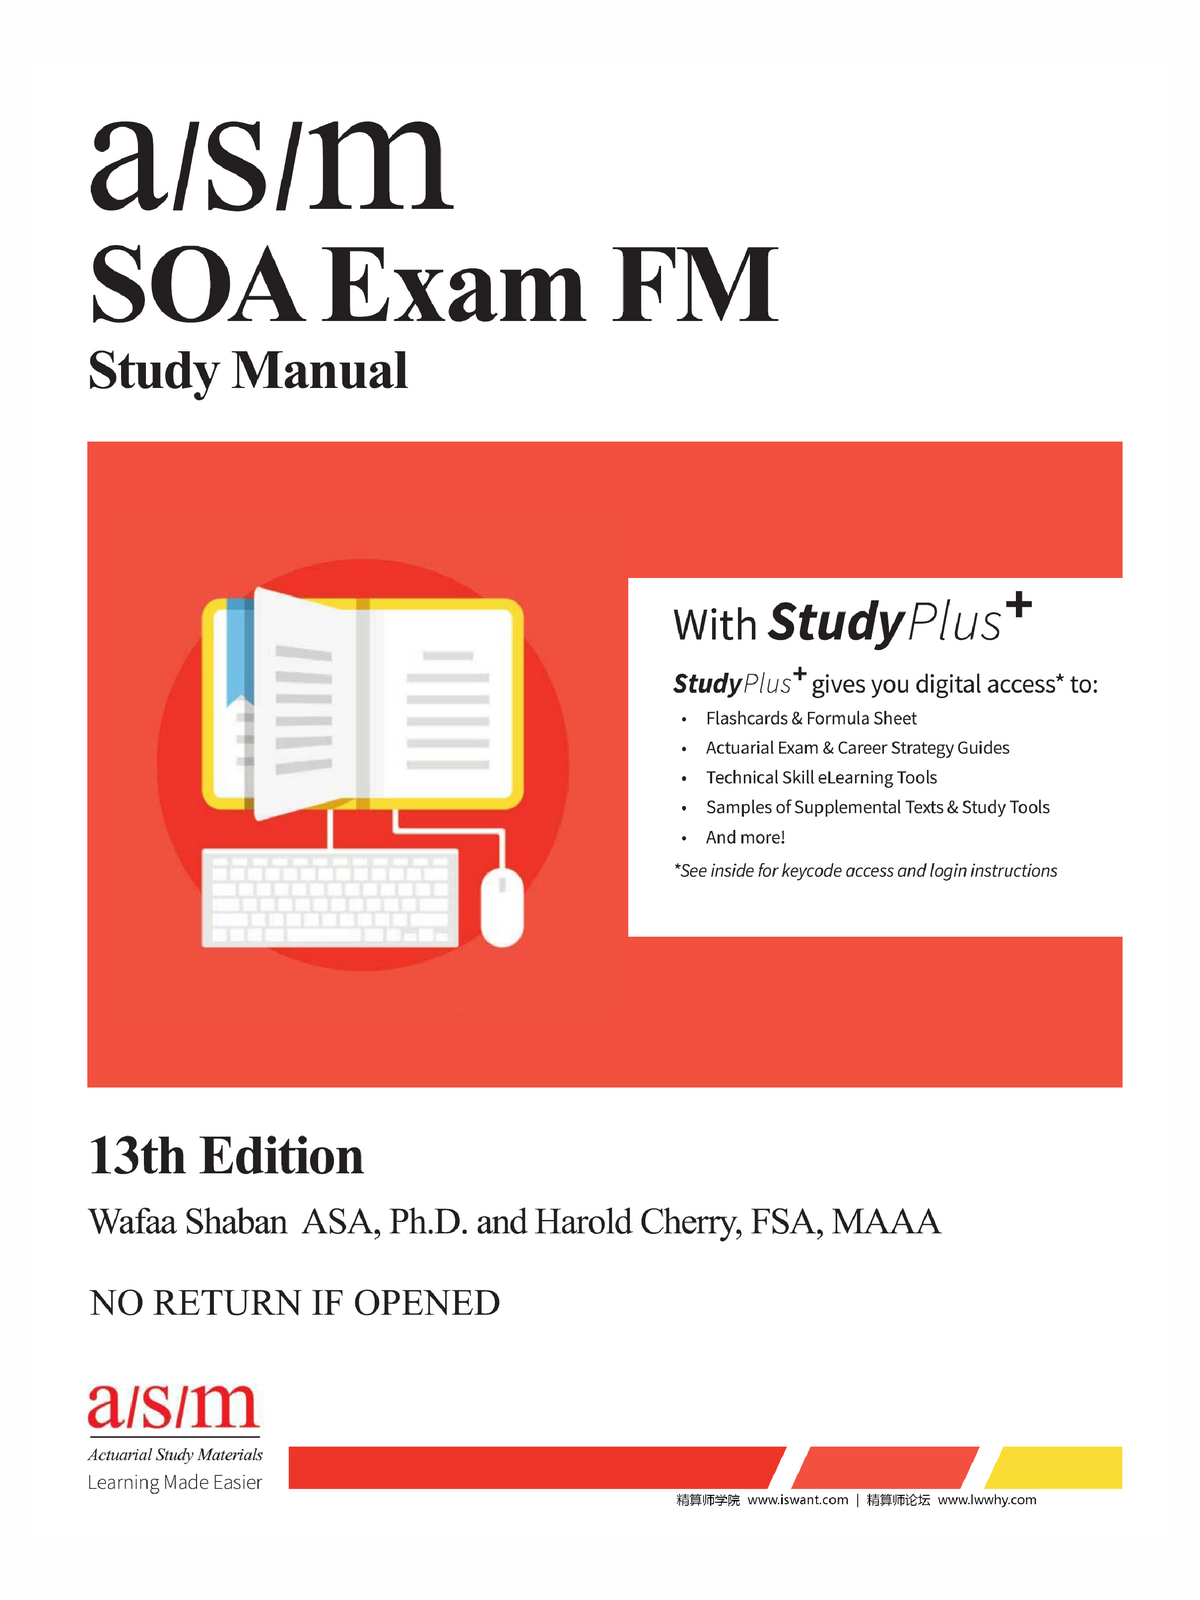 [PRE] ASM Study Manual for SOA Exam FM, 13th Edition 1100 Structural